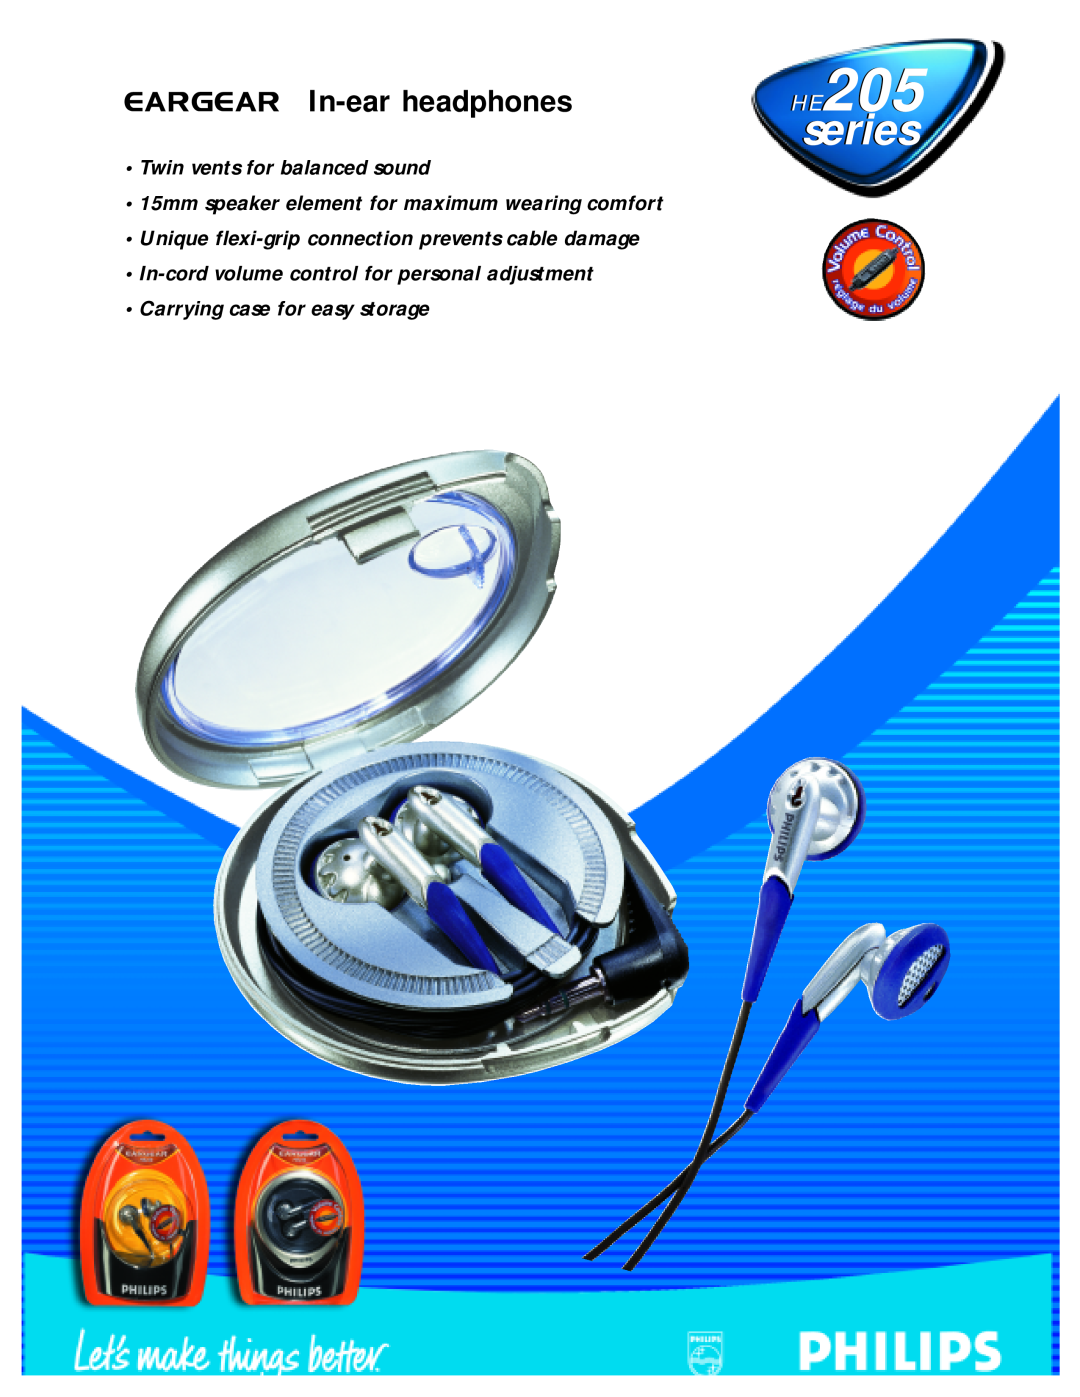 Philips HE205 Series manual EARGEAR In-earheadphones, series, Twin vents for balanced sound 